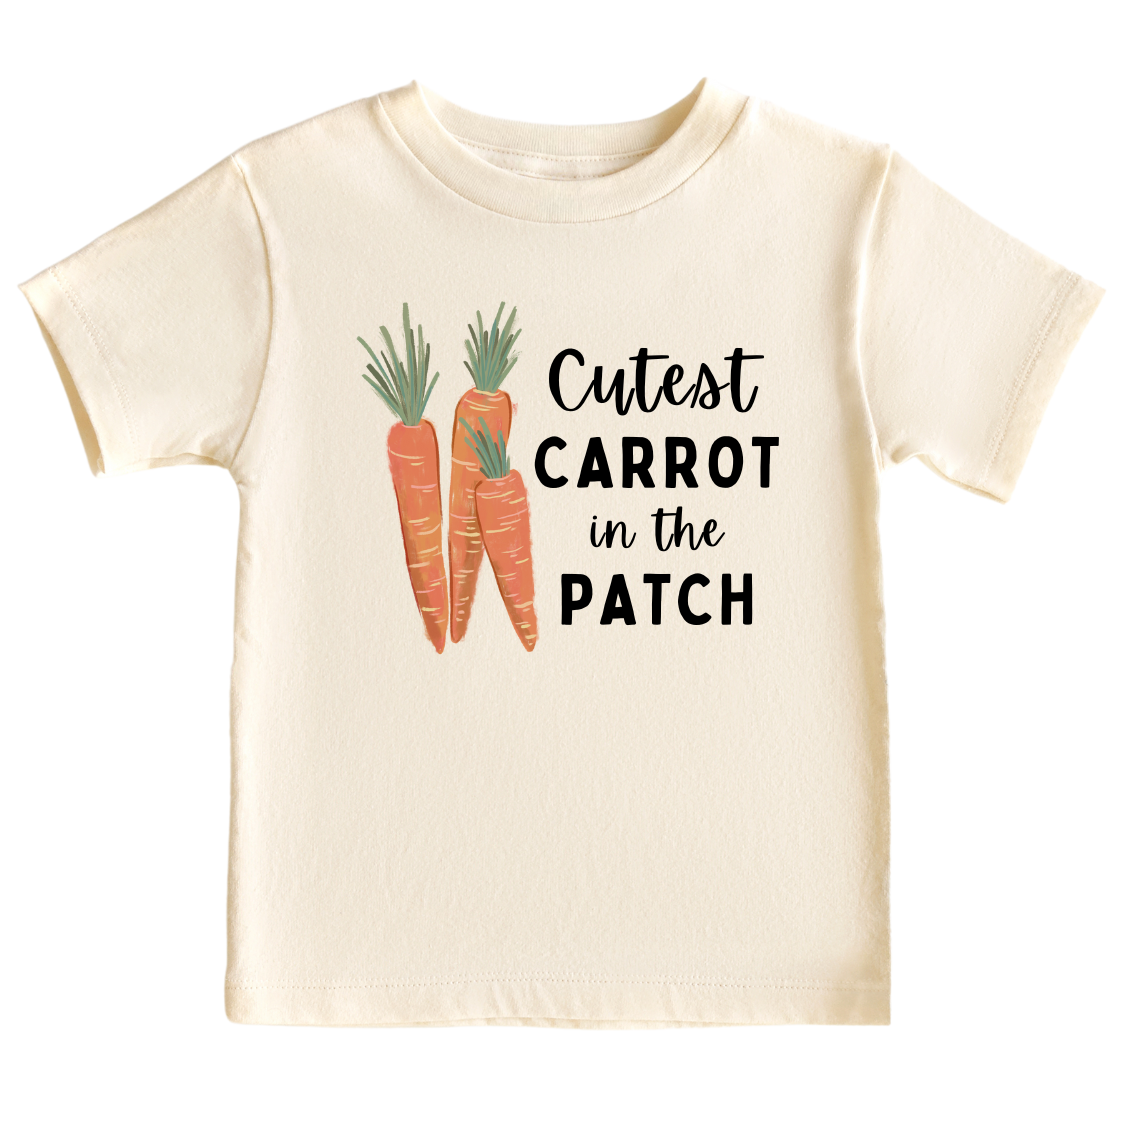 Kid's t-shirt - Cute carrot bunch graphic with 'Cutest Carrot in the Patch' text.